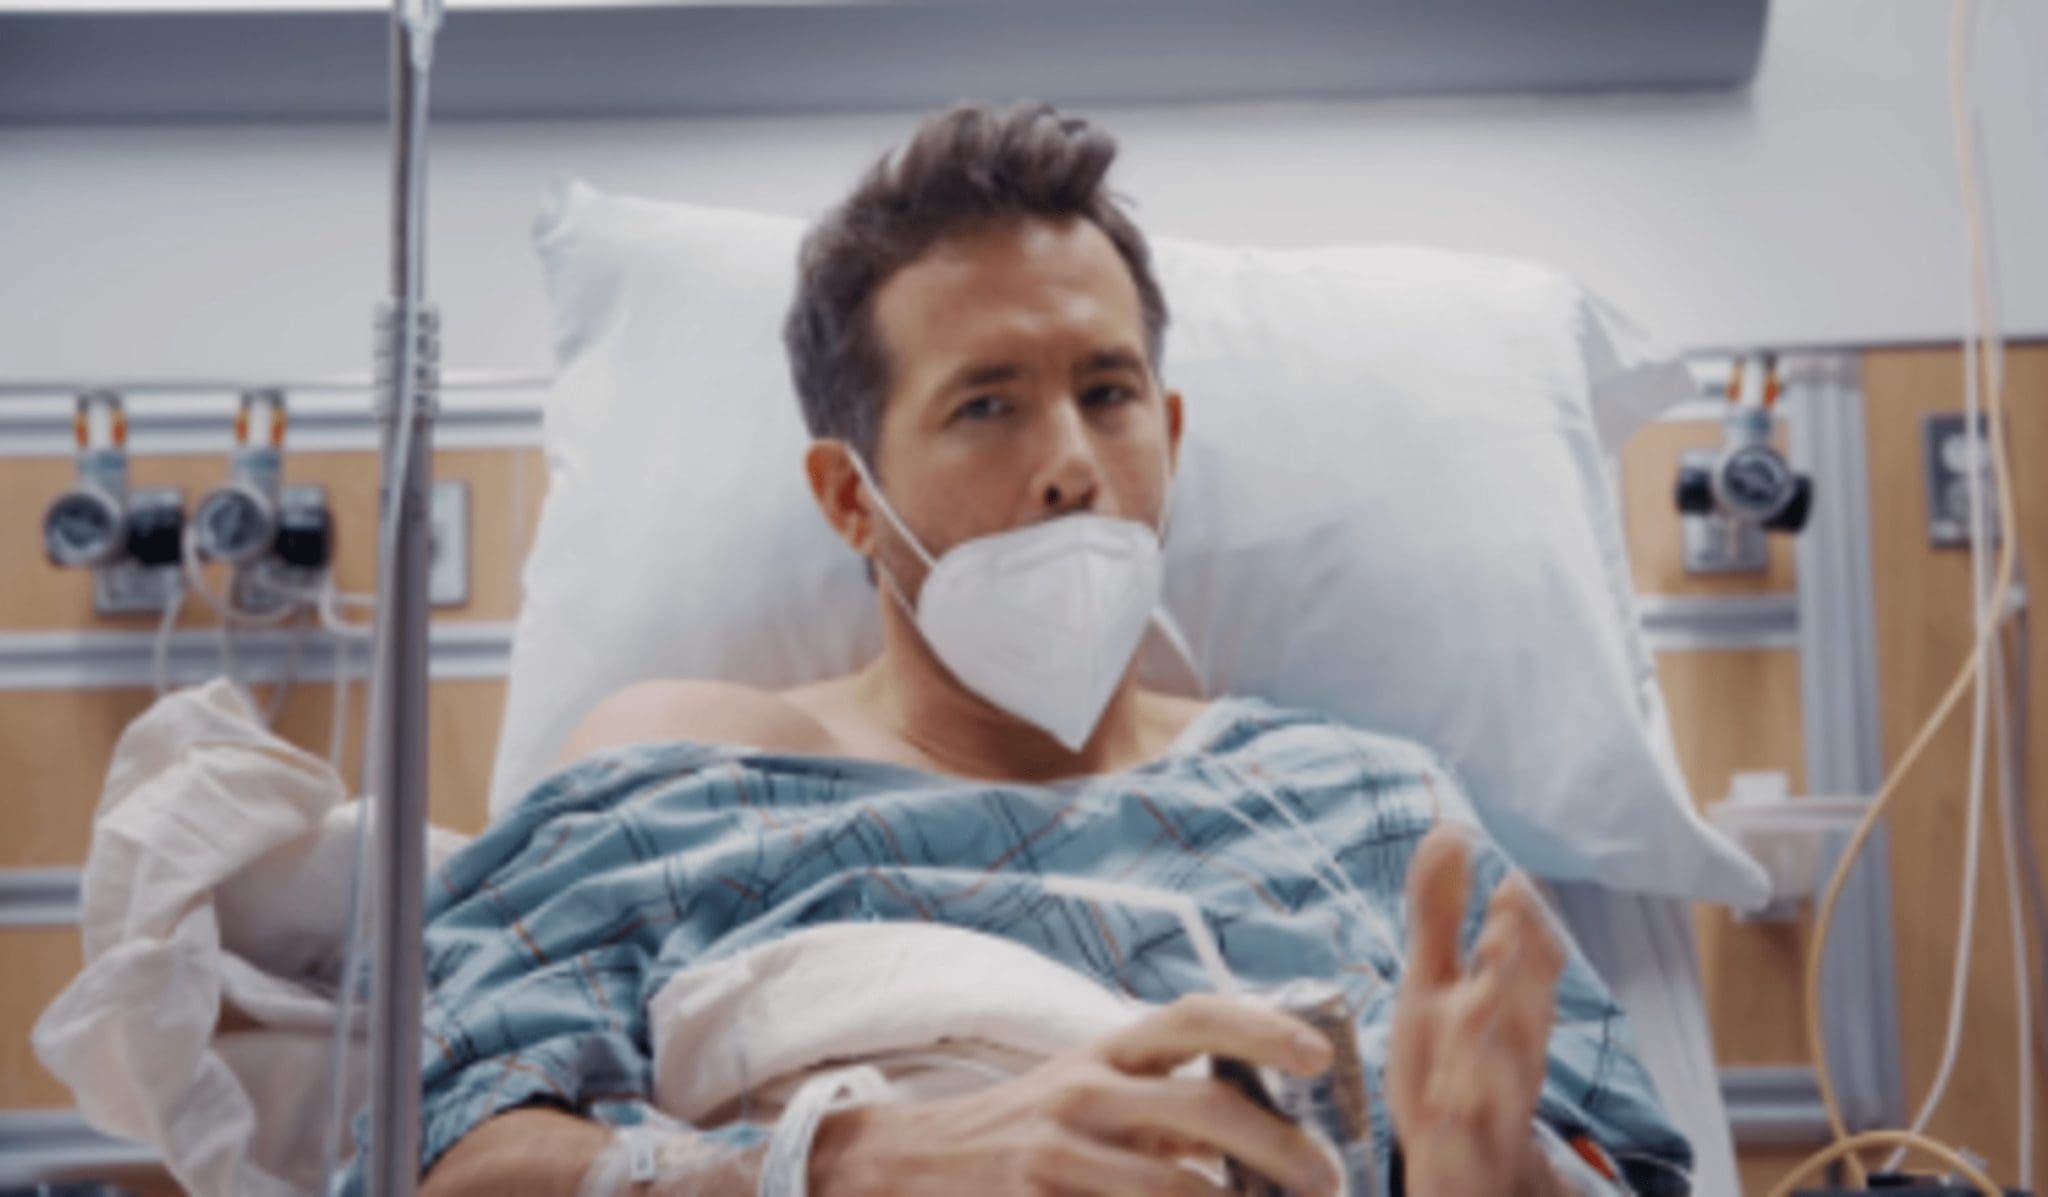 In The Process Of His Colonoscopy, Ryan Reynolds Finds A Very Small Polyp